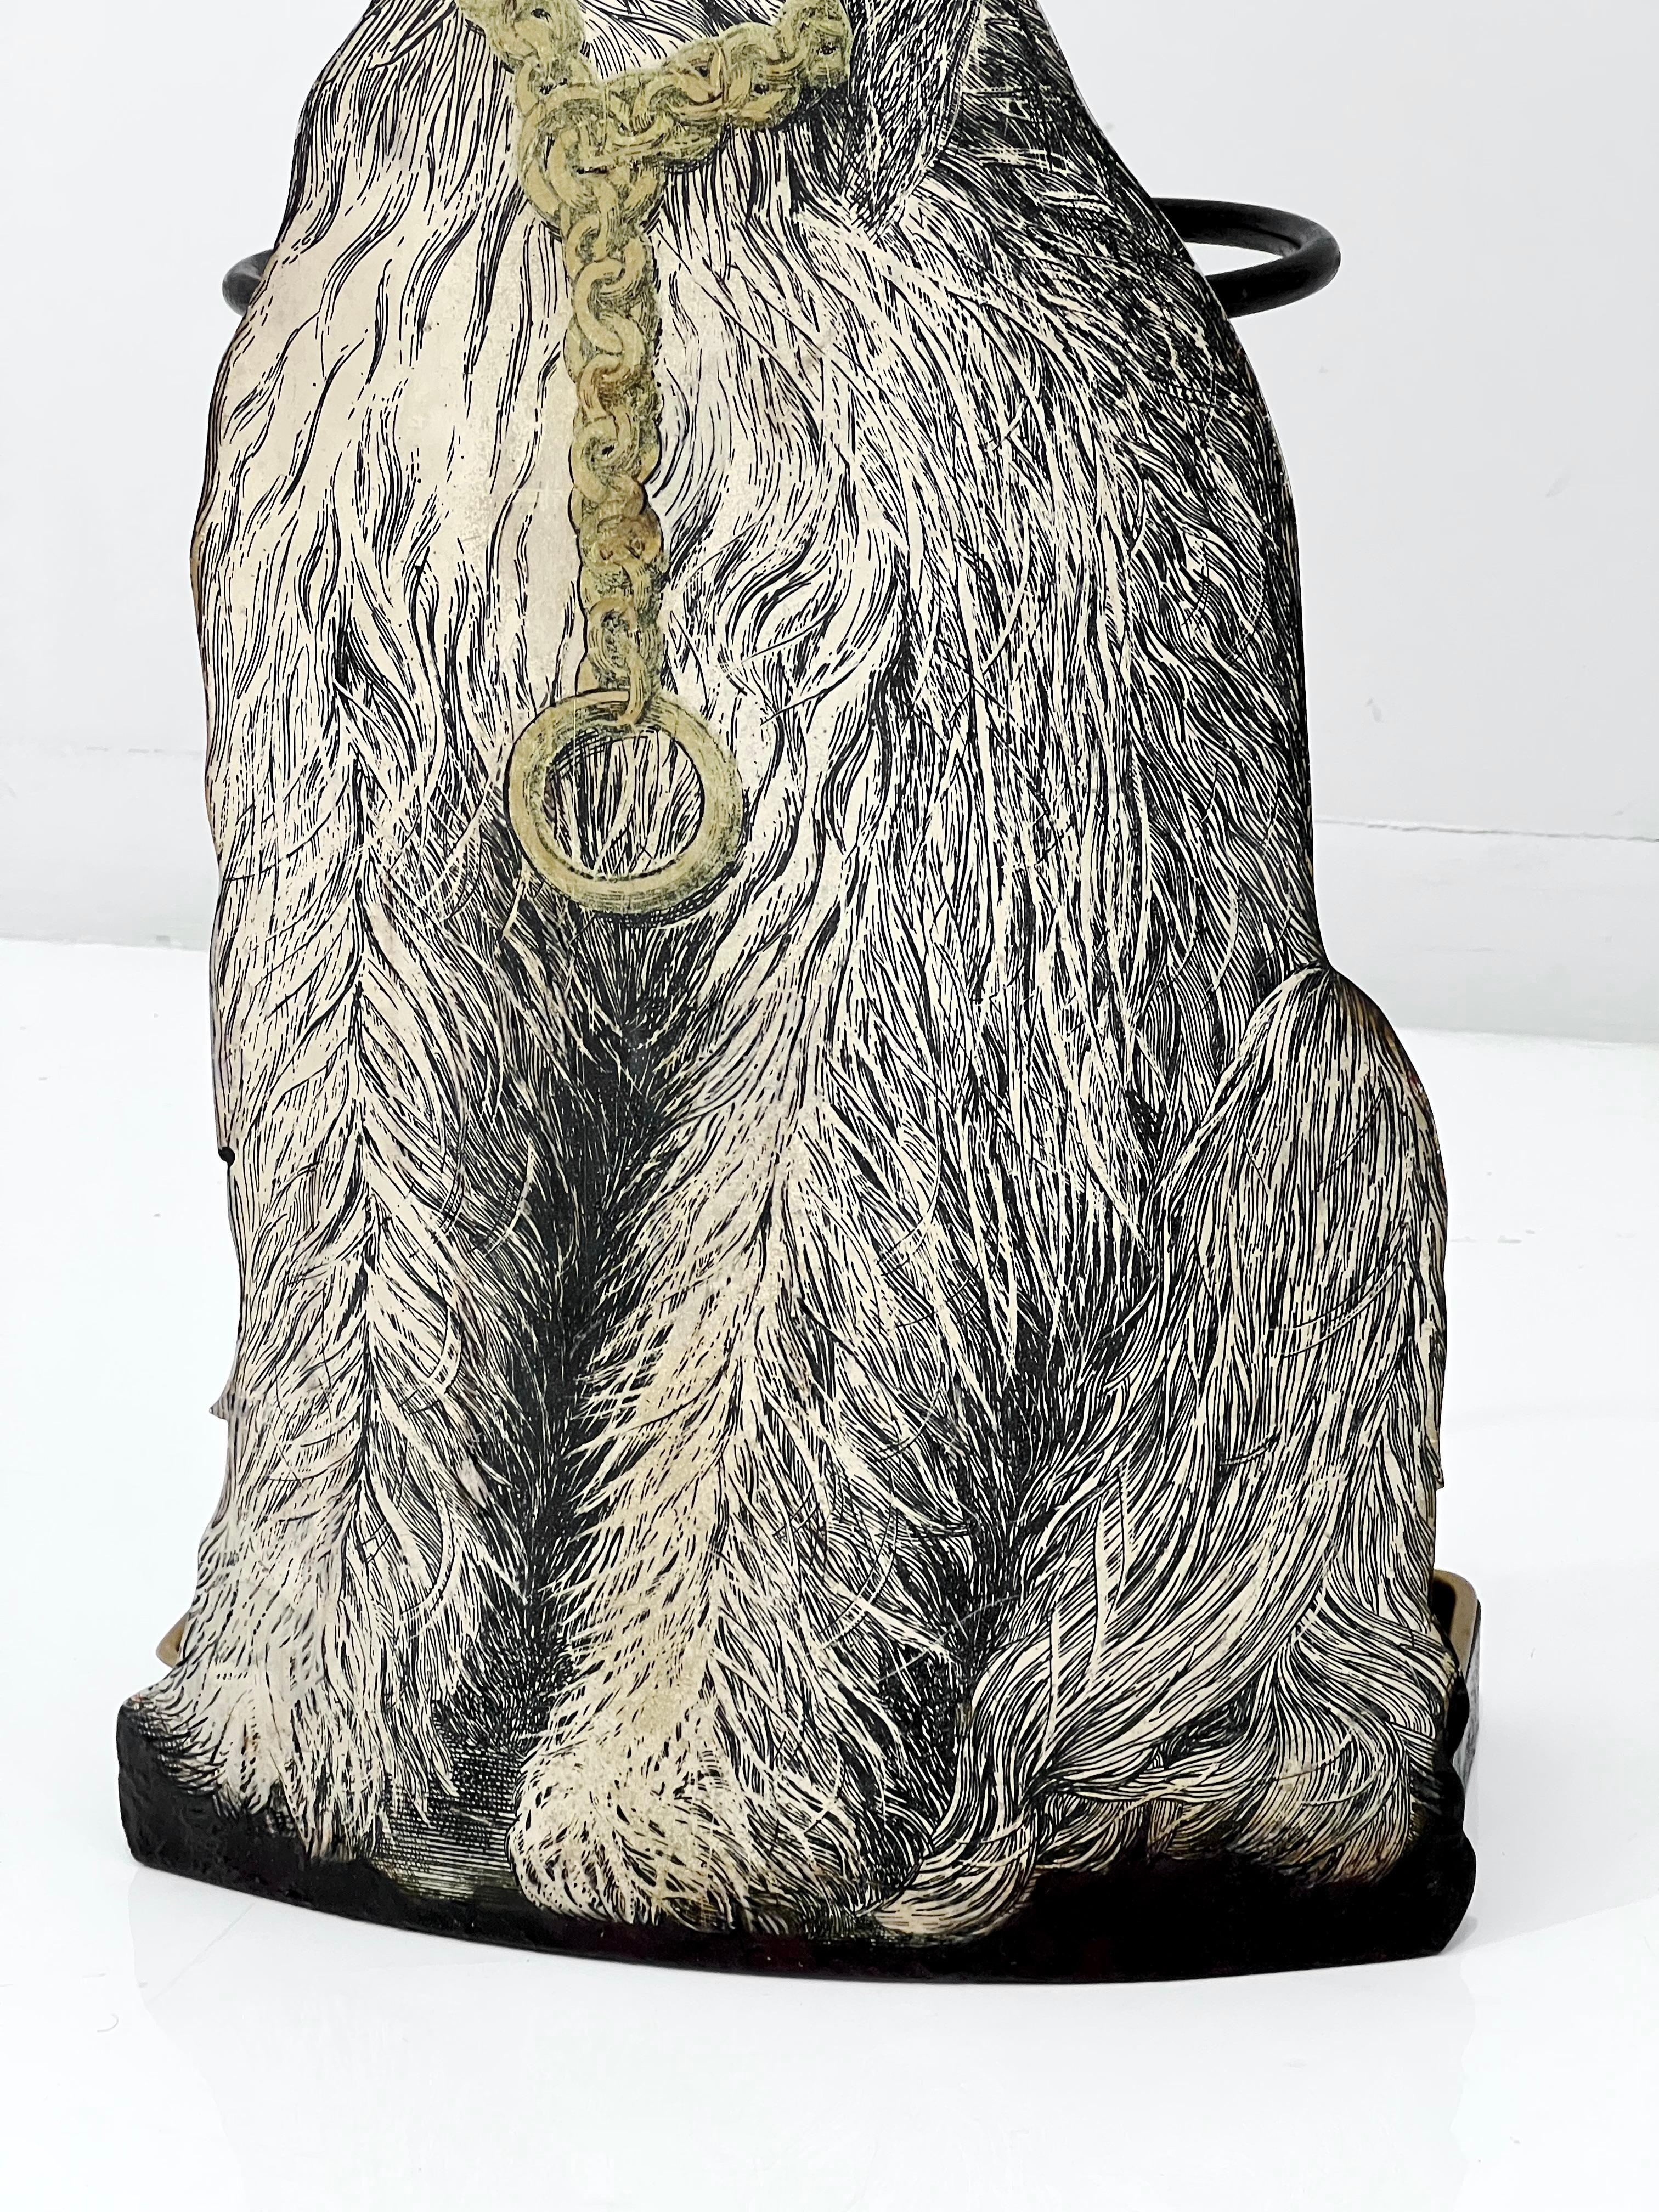 Mid-20th Century Piero Fornasetti 'Afghan Hound' Umbrella Stand For Sale